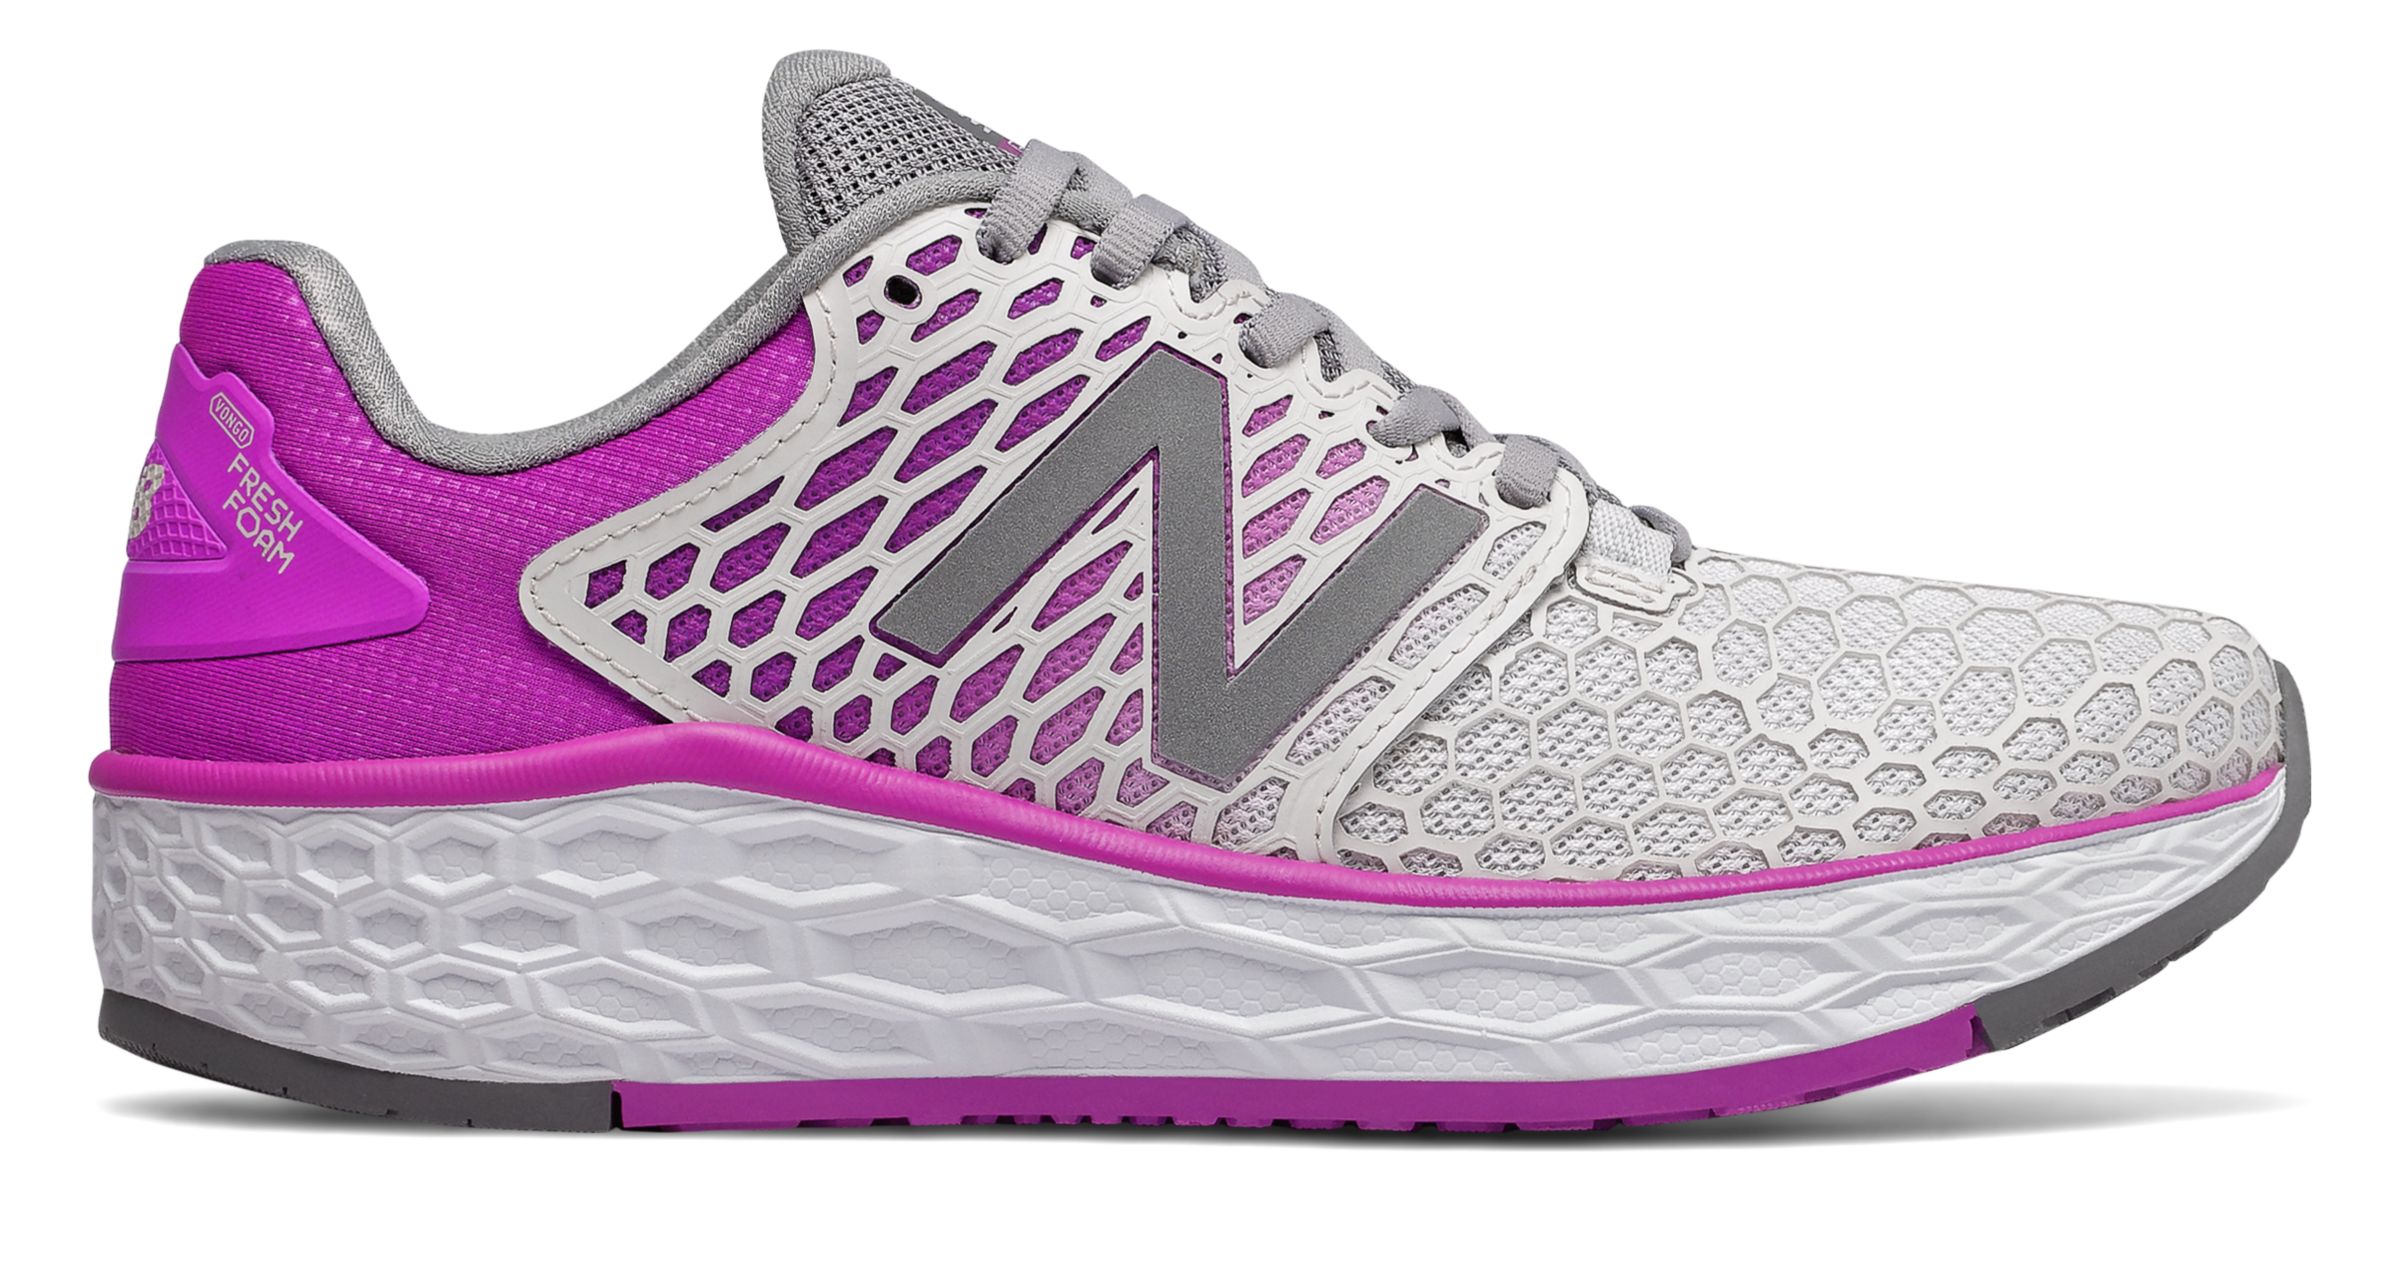 New Balance WVNGO-V3 on Sale - Discounts Up to 40% Off on WVNGOGV3 at Joe's  New Balance Outlet